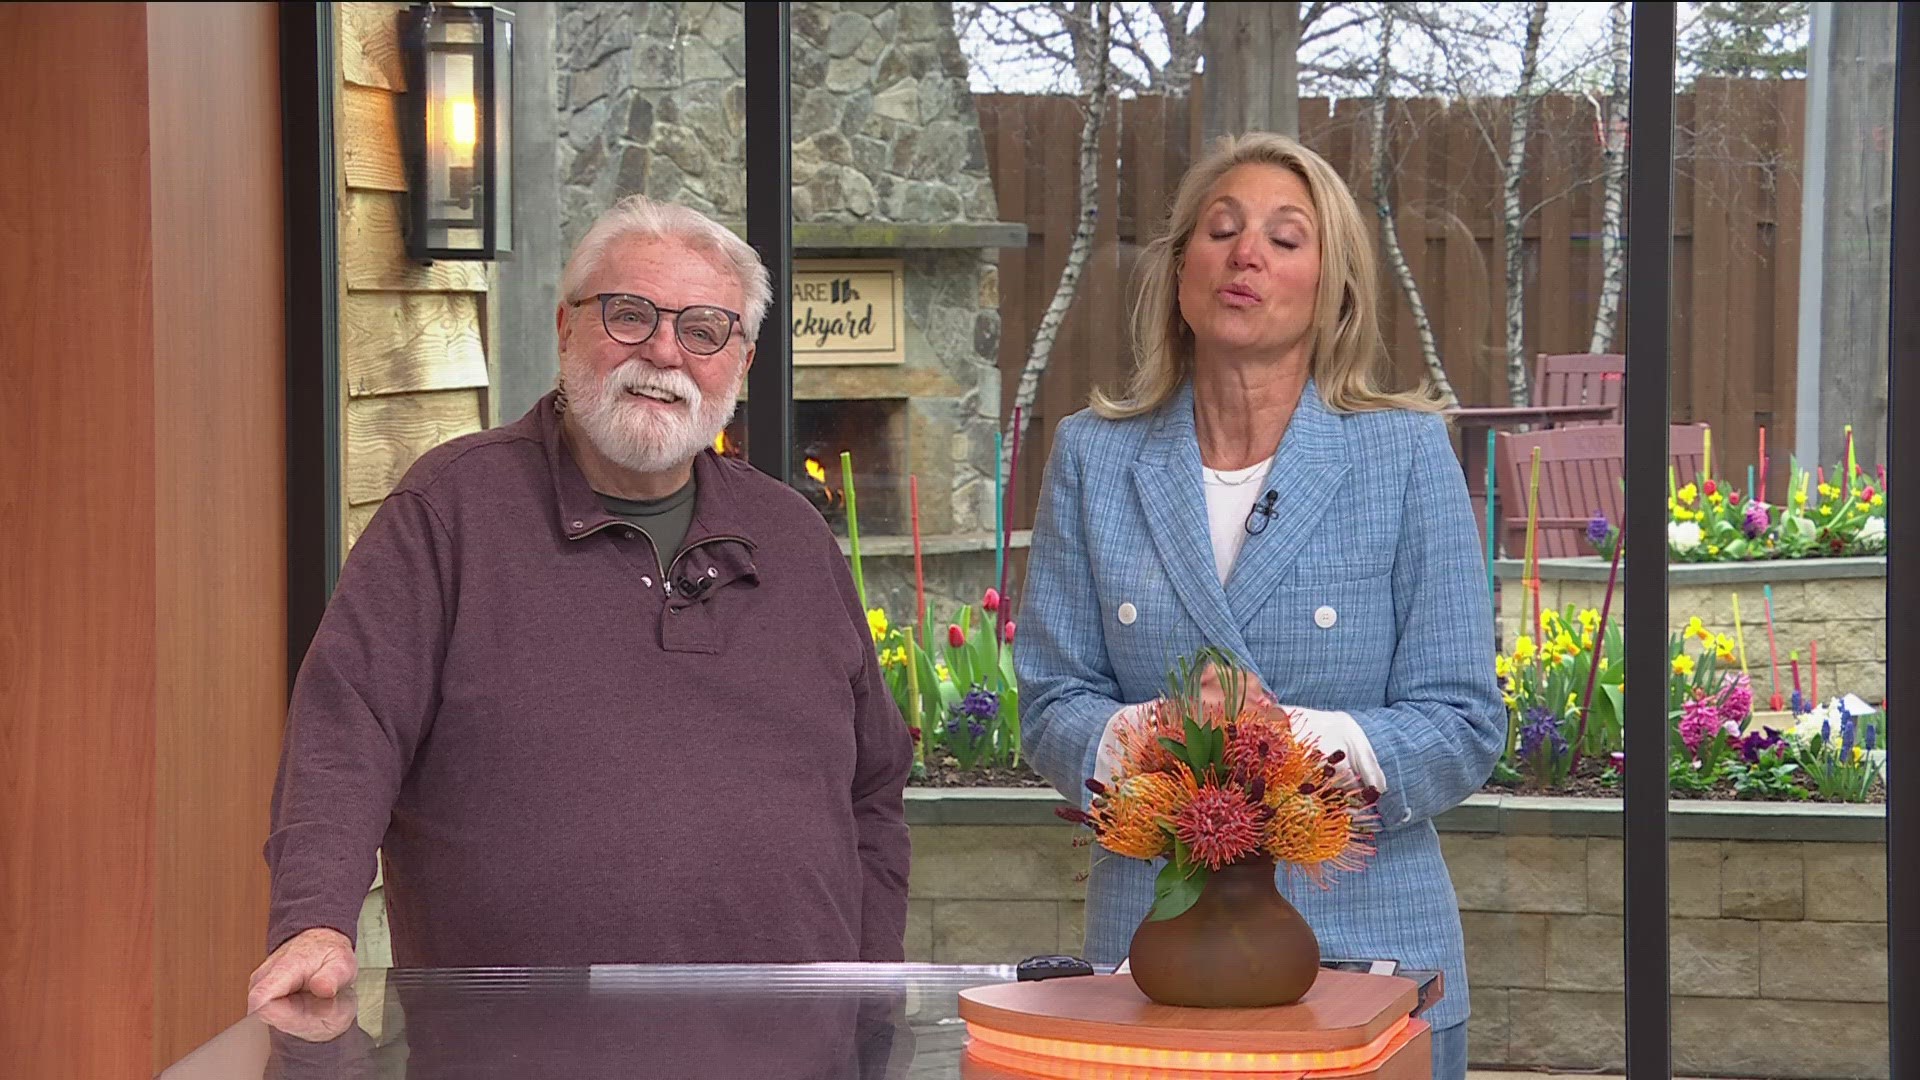 Bobby talks about deterring robins, why you should mow around your flowers, and how to move a very large cactus.